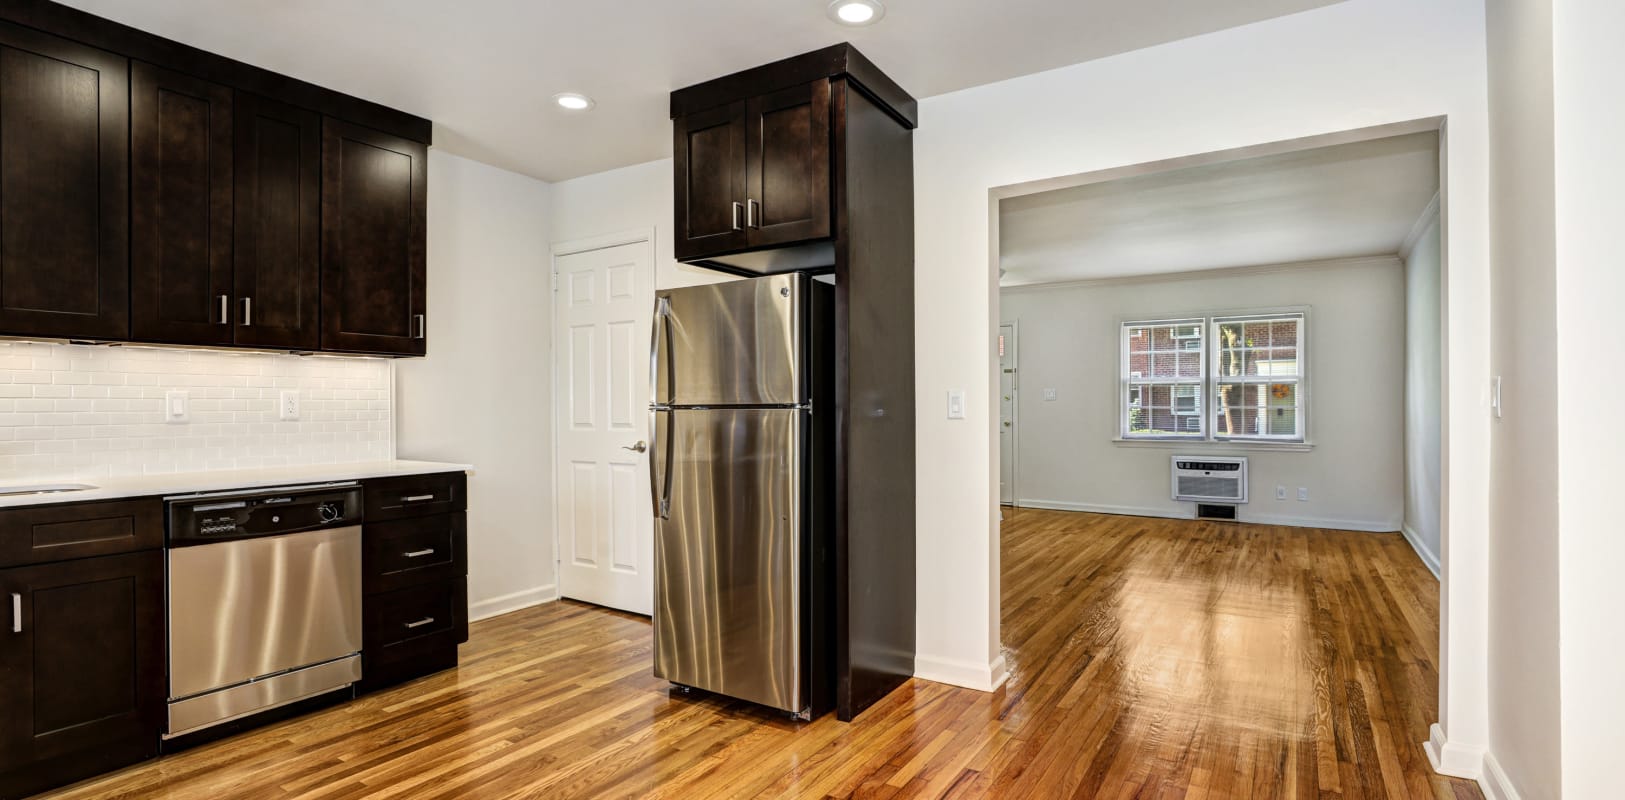 Kitchen with stainless-steel appliances at General Wayne Townhomes and Ridgedale Gardens in Madison, New Jersey